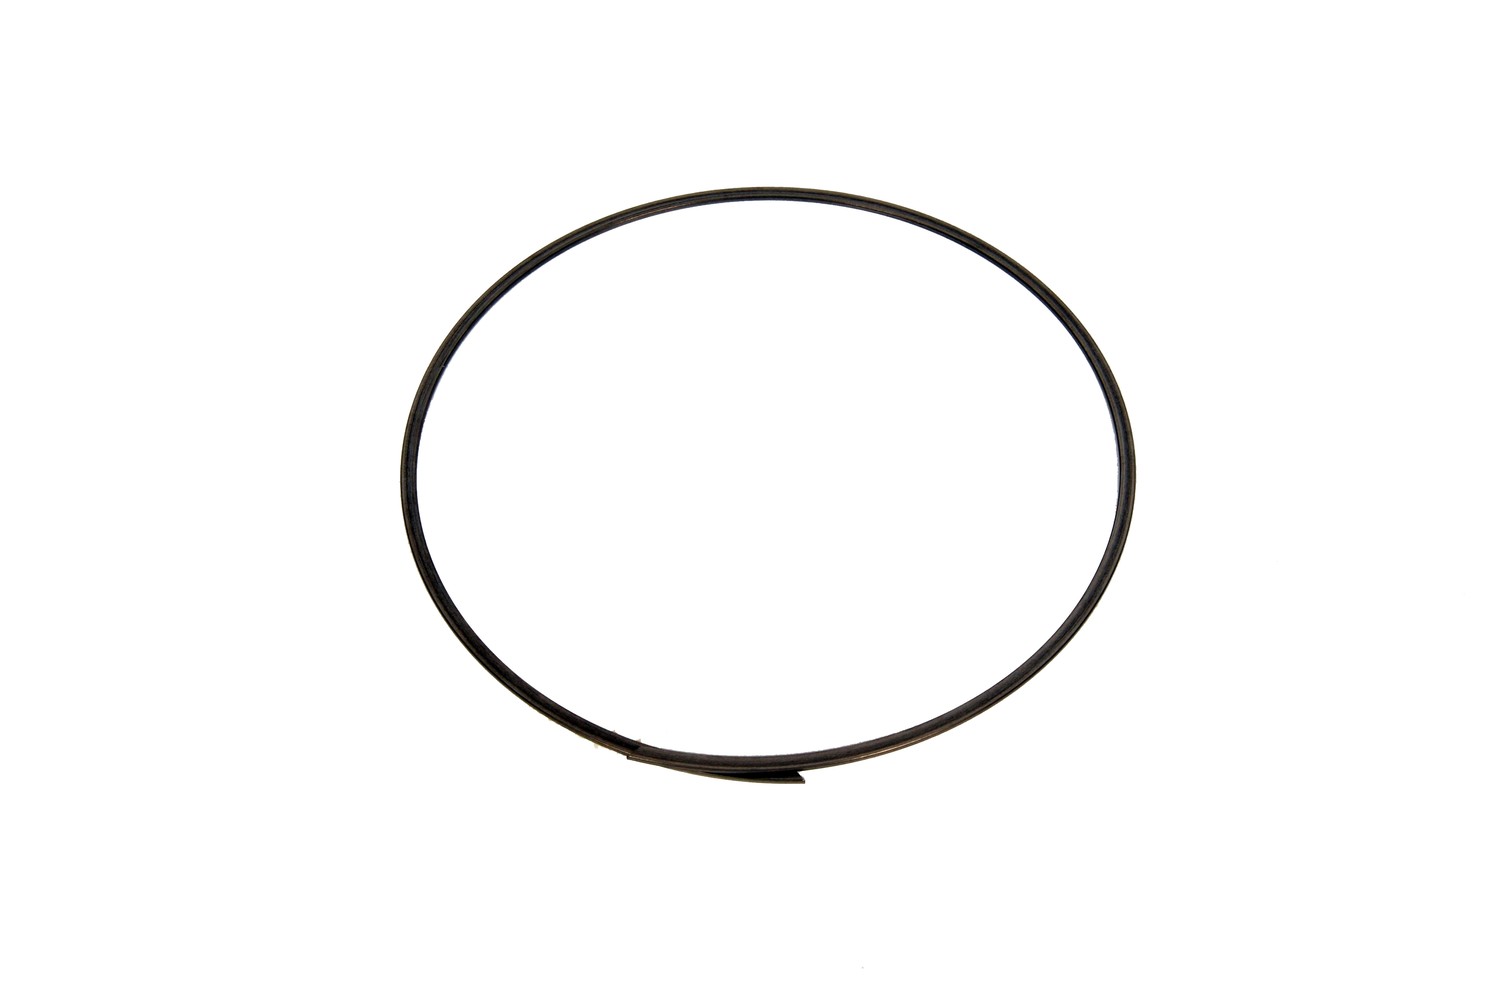 GM GENUINE PARTS - Automatic Transmission Clutch Spring Retaining Ring - GMP 24263709